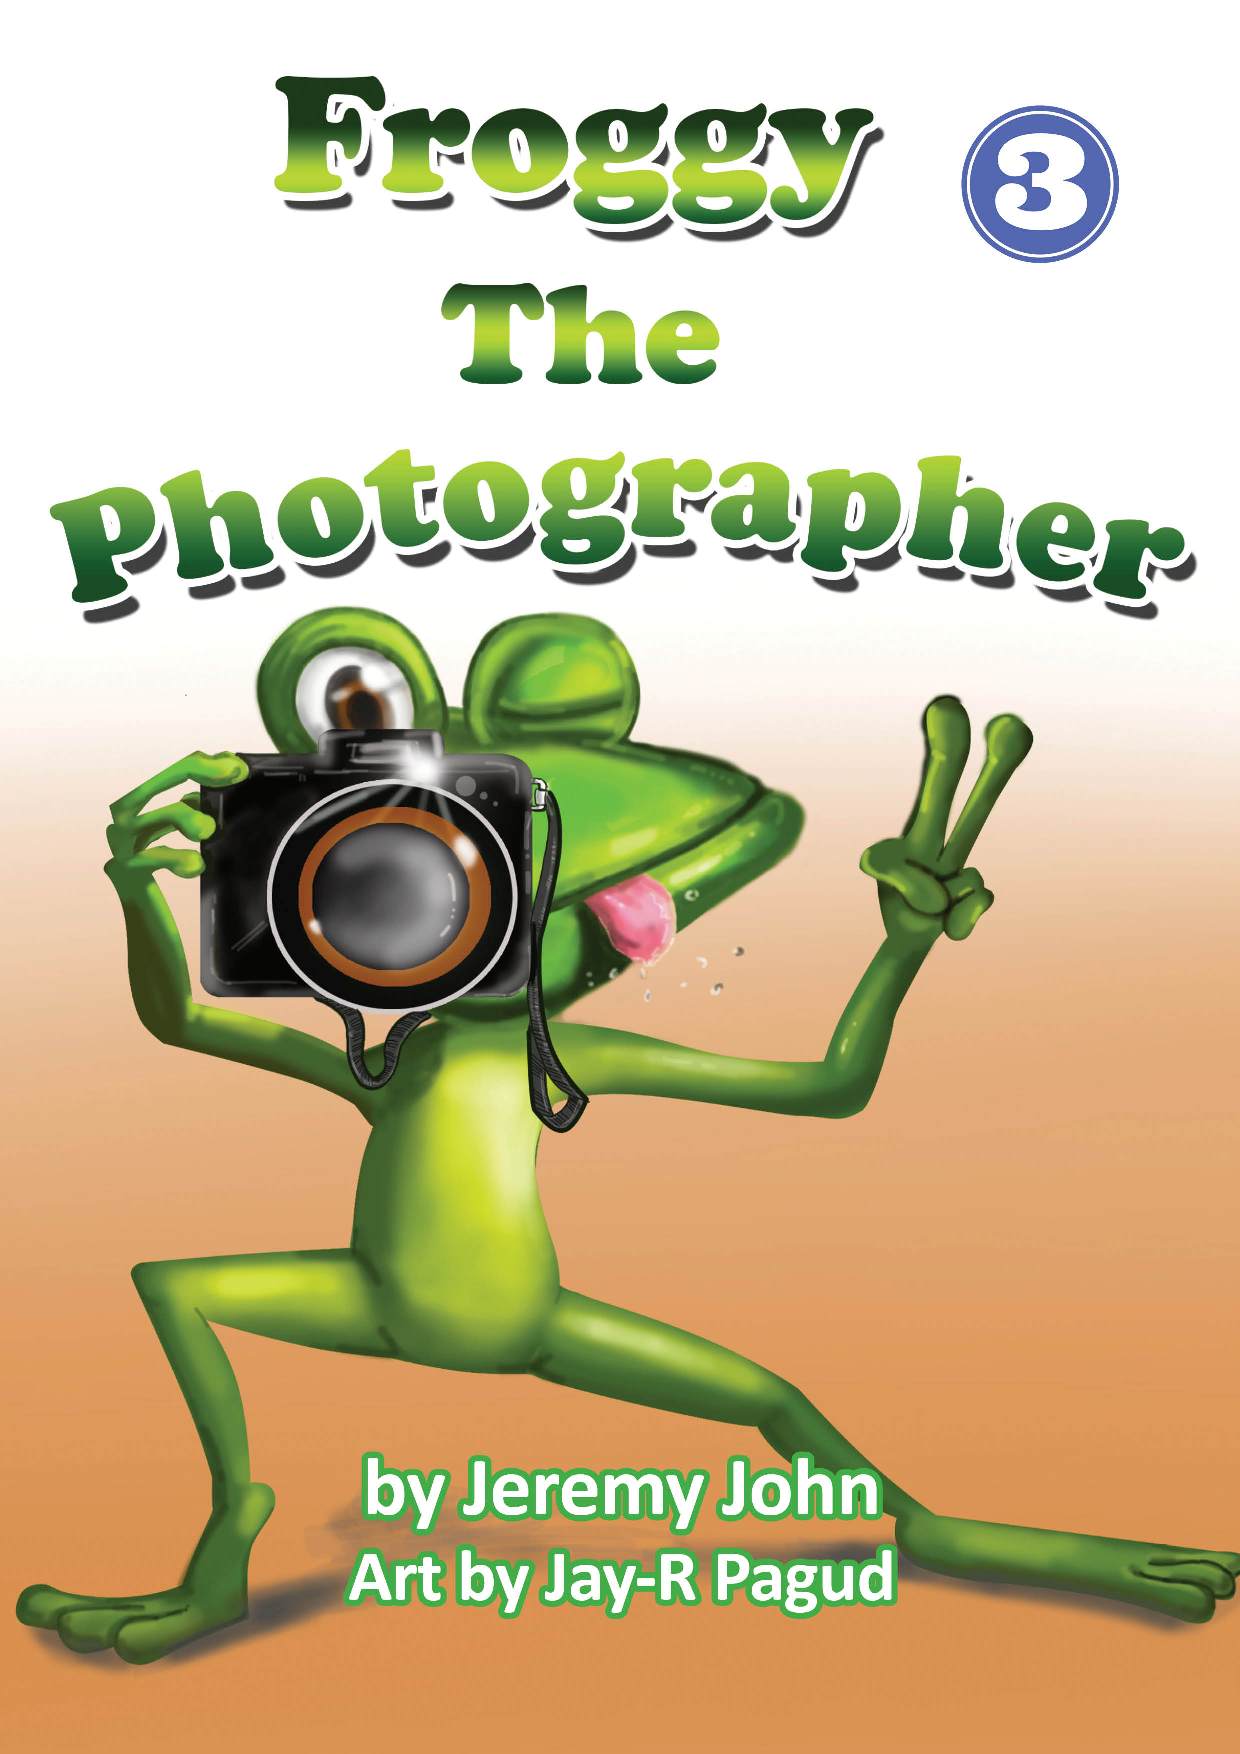 A book title page: Froggy the photographer by Jeremy John. Art by Jay-R Pagud. 3. A drawing of a frog holding a camera against its eye, pointing in front. The frog waves number two finger sign.